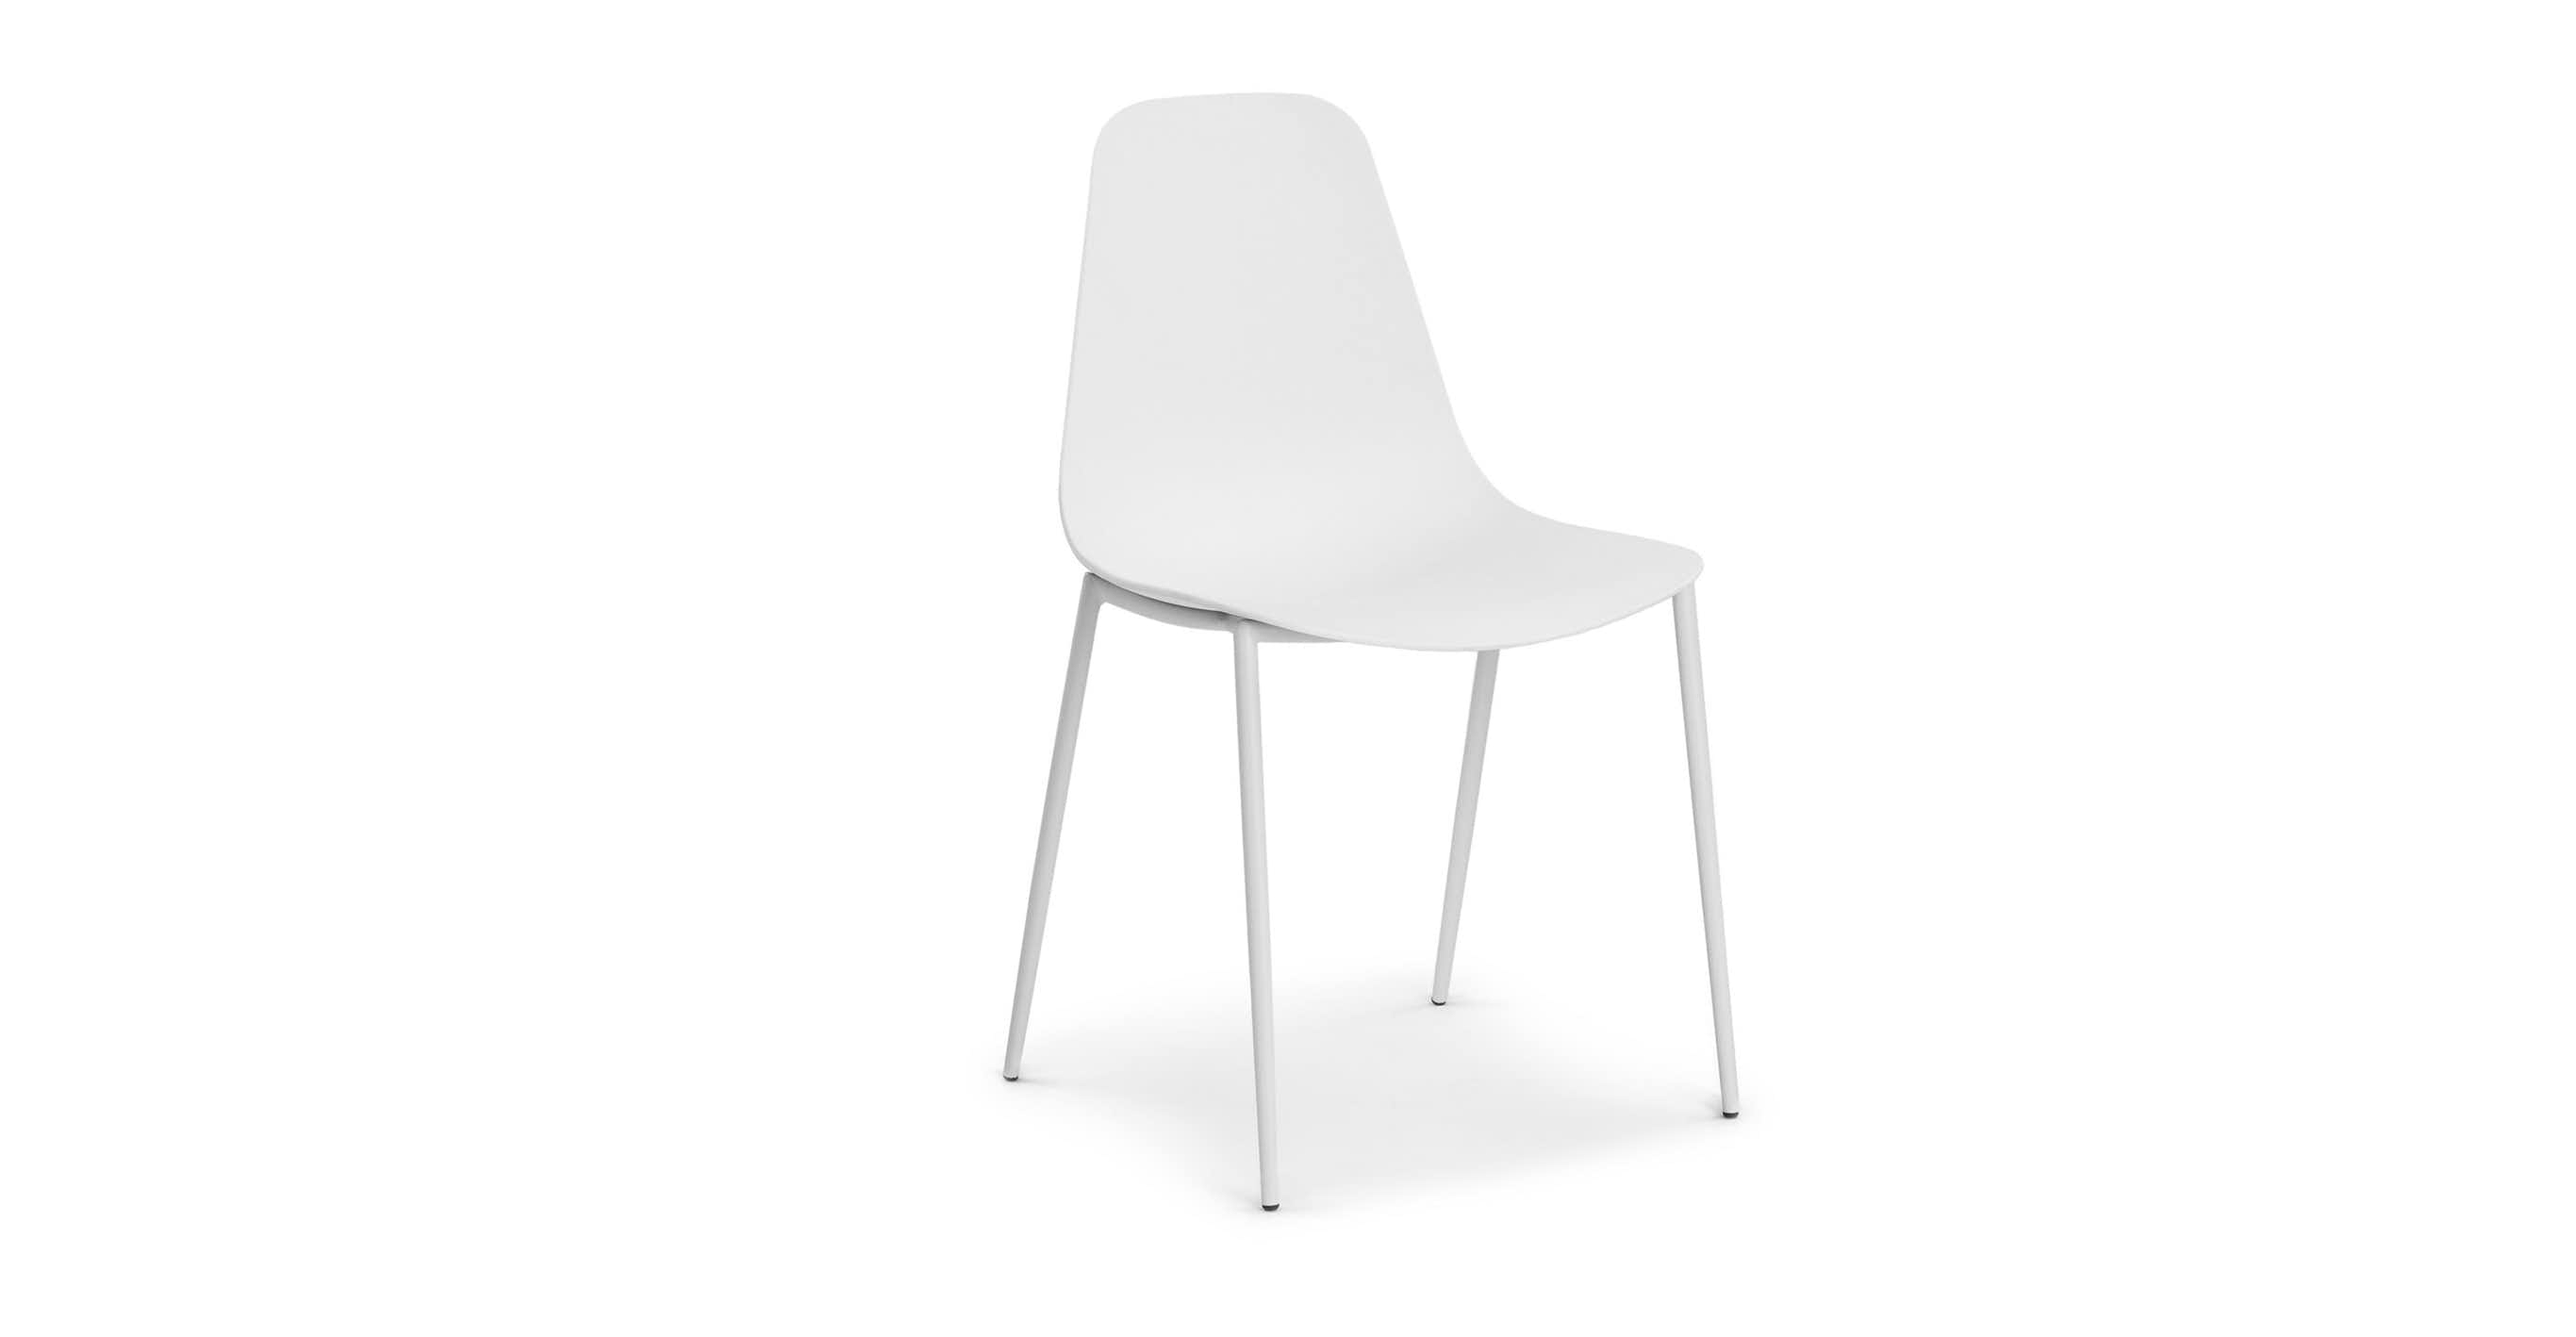 Svelti Pure White Dining Chair - Article